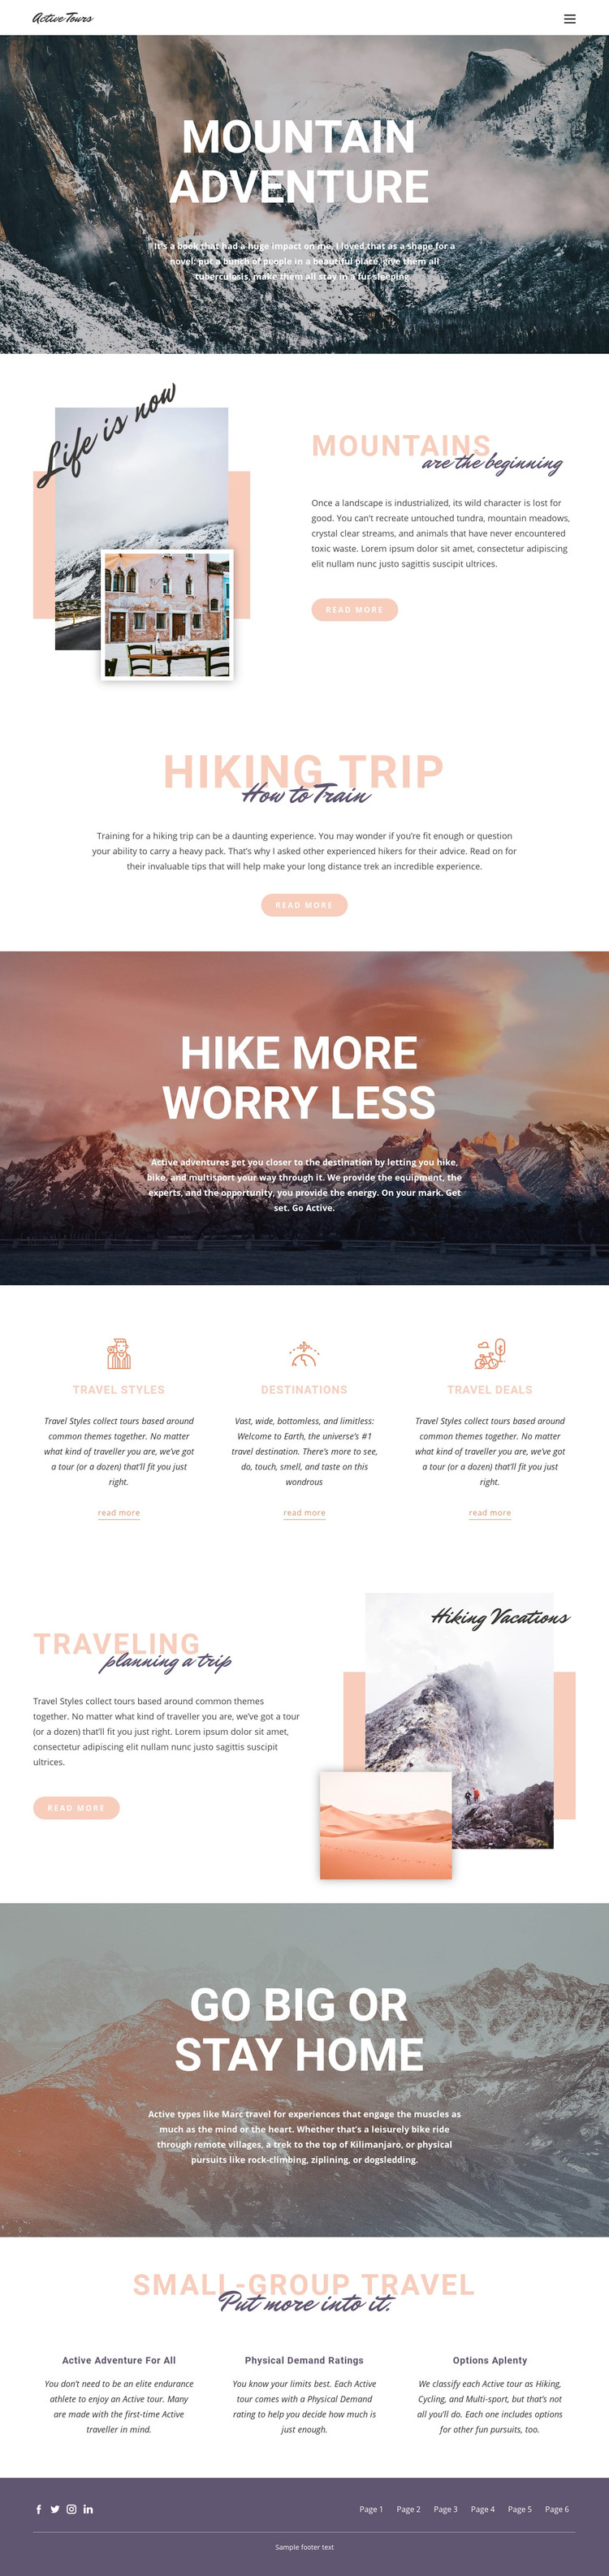 Guided backpacking trips Elementor Template Alternative